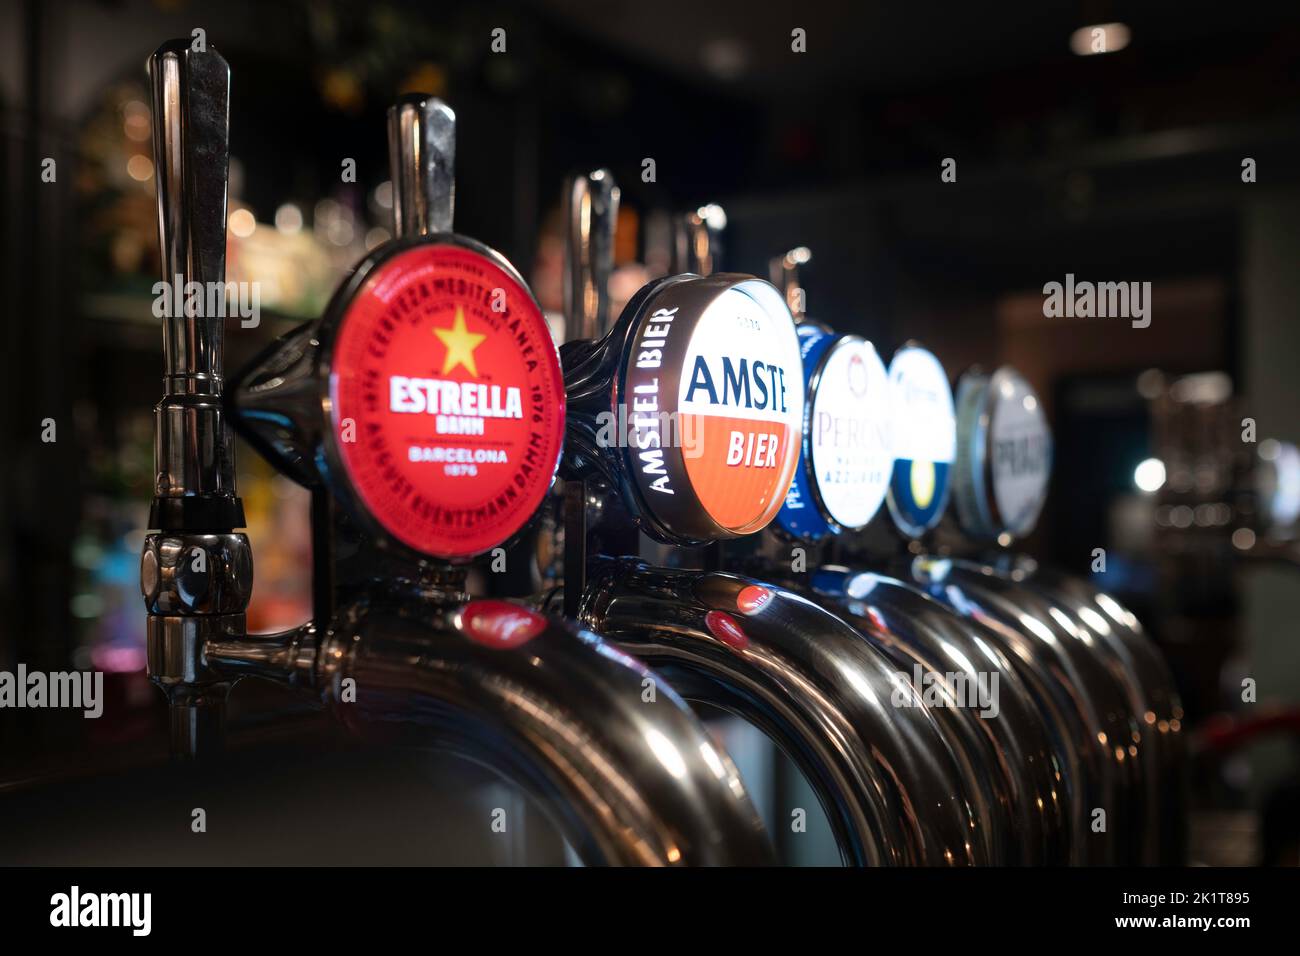 Stainless steel beer taps, craft beer in an English pub, various brands. Focus on 'Amstel Bier' sign. Narrow depth of field, side view Stock Photo